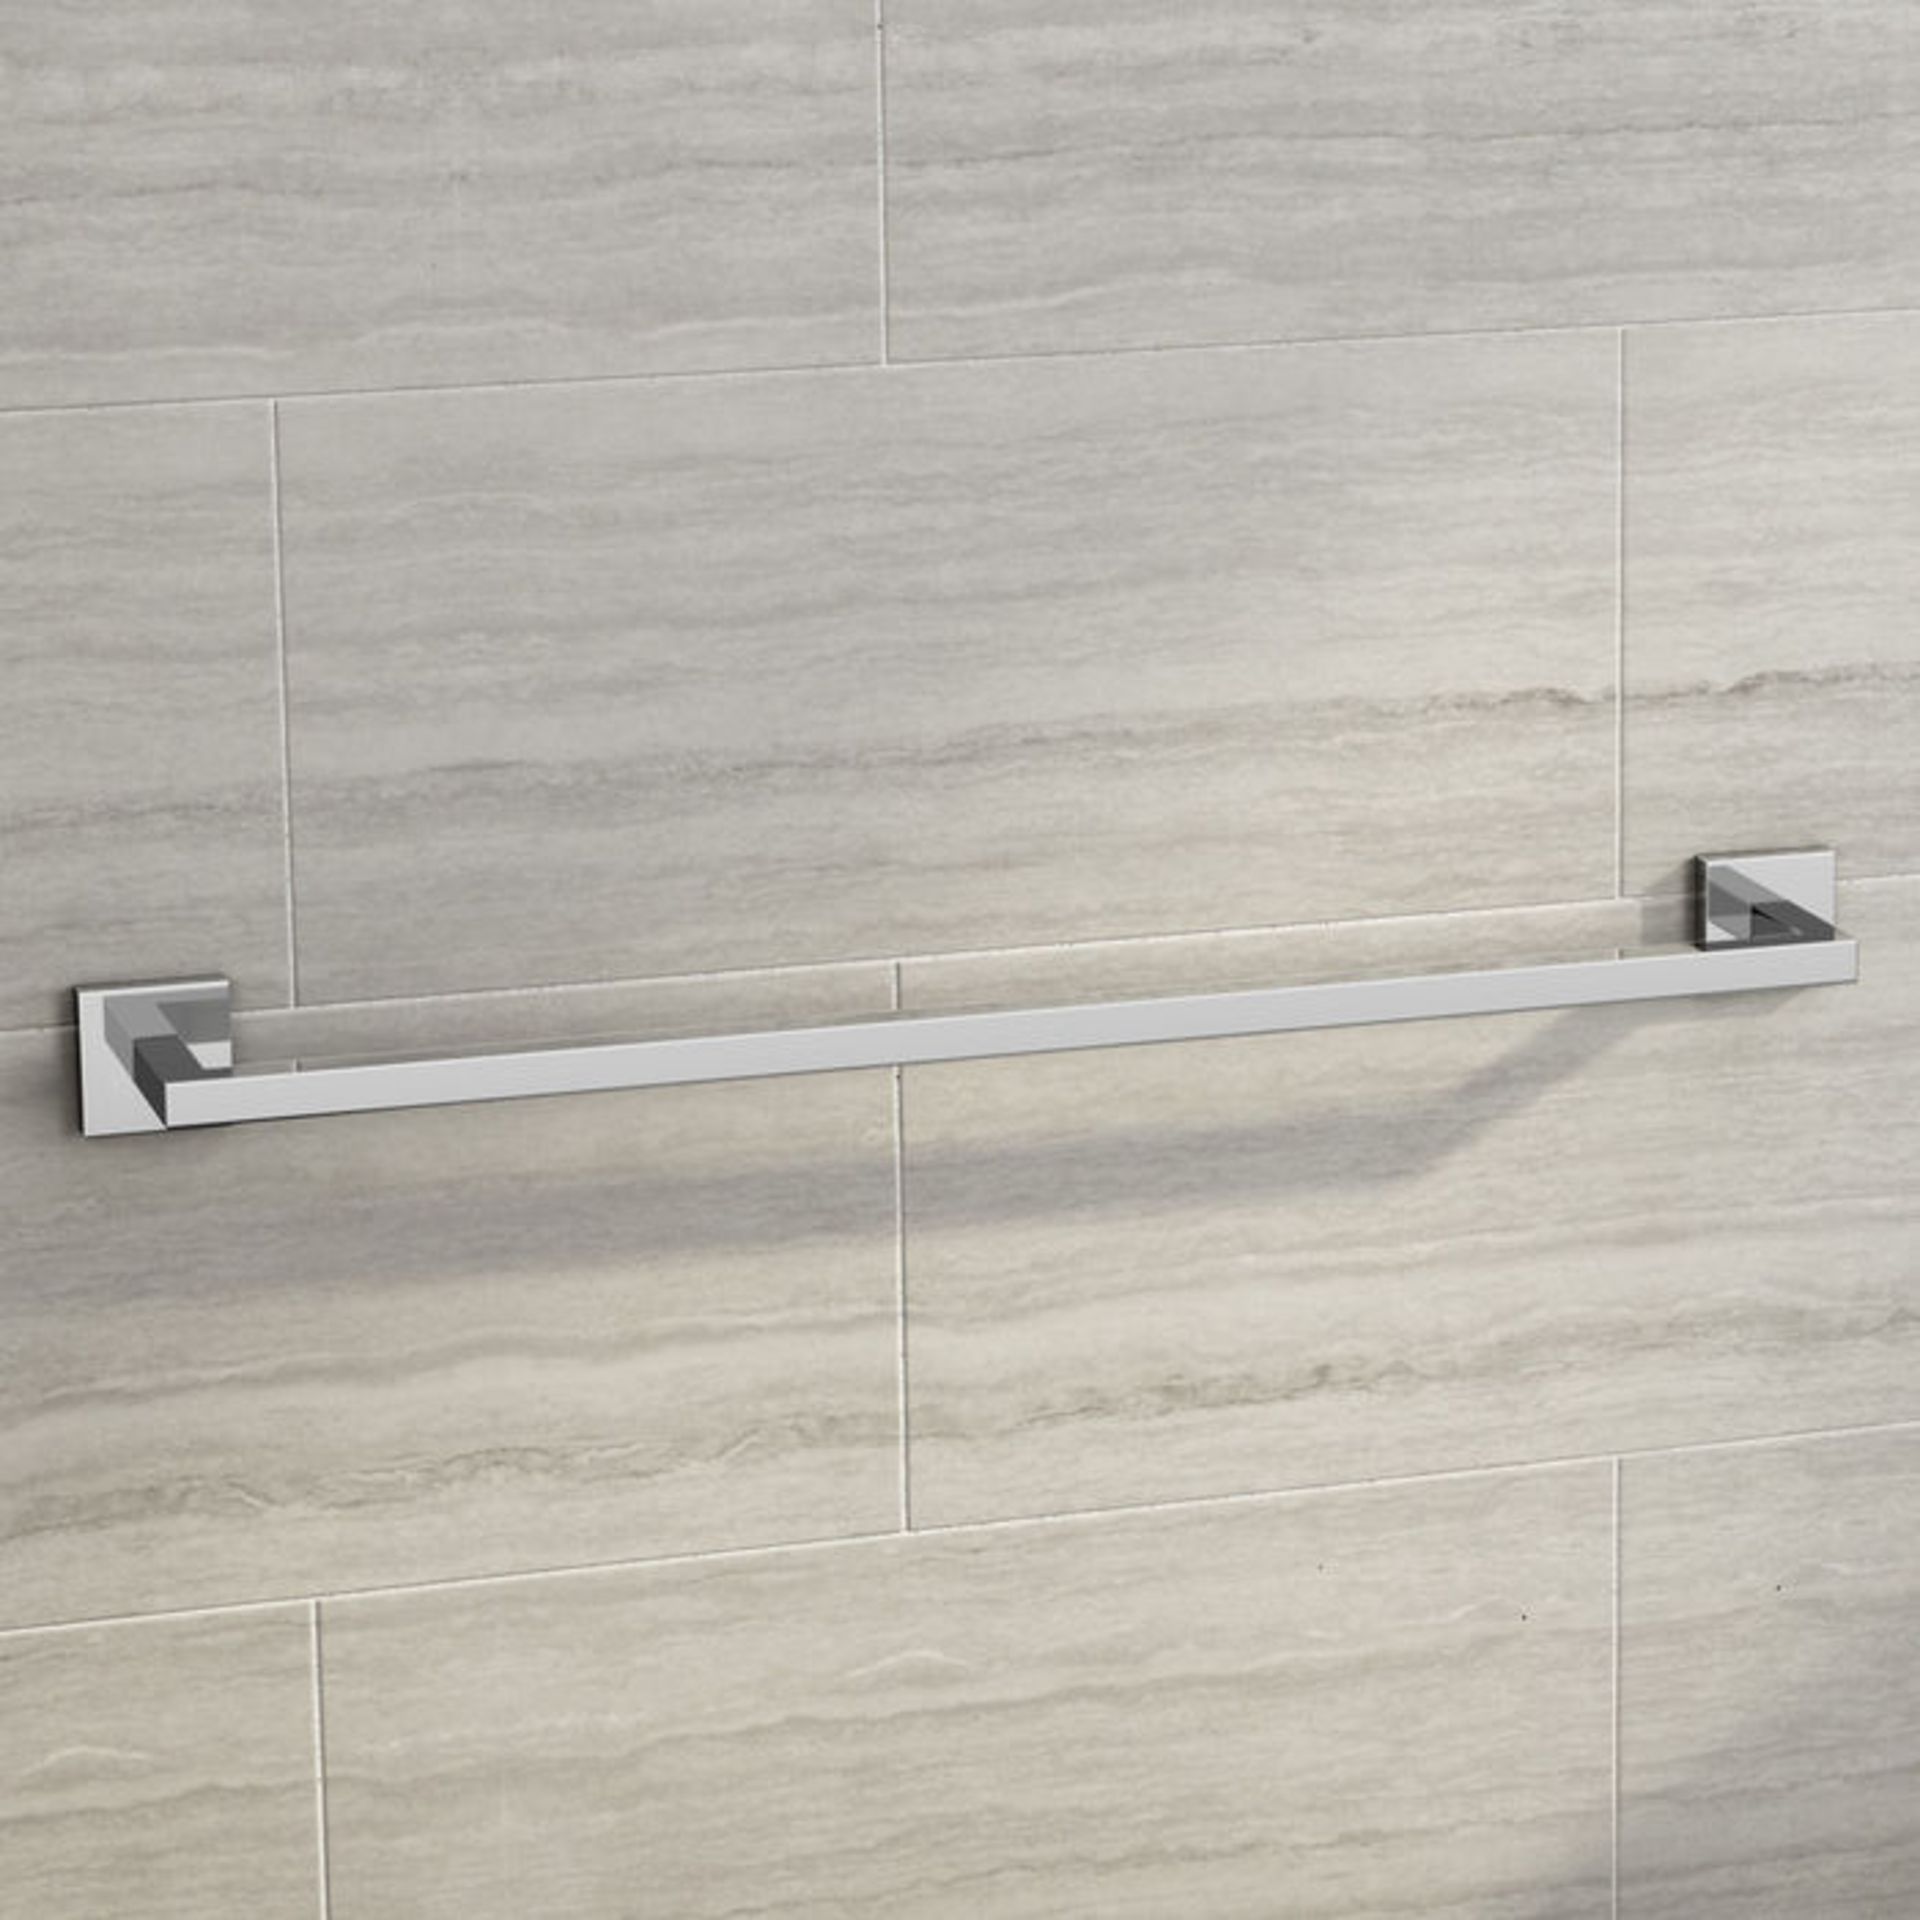 (SP15) Jesmond Towel Rail Finishes your bathroom with a little extra functionality and style Made